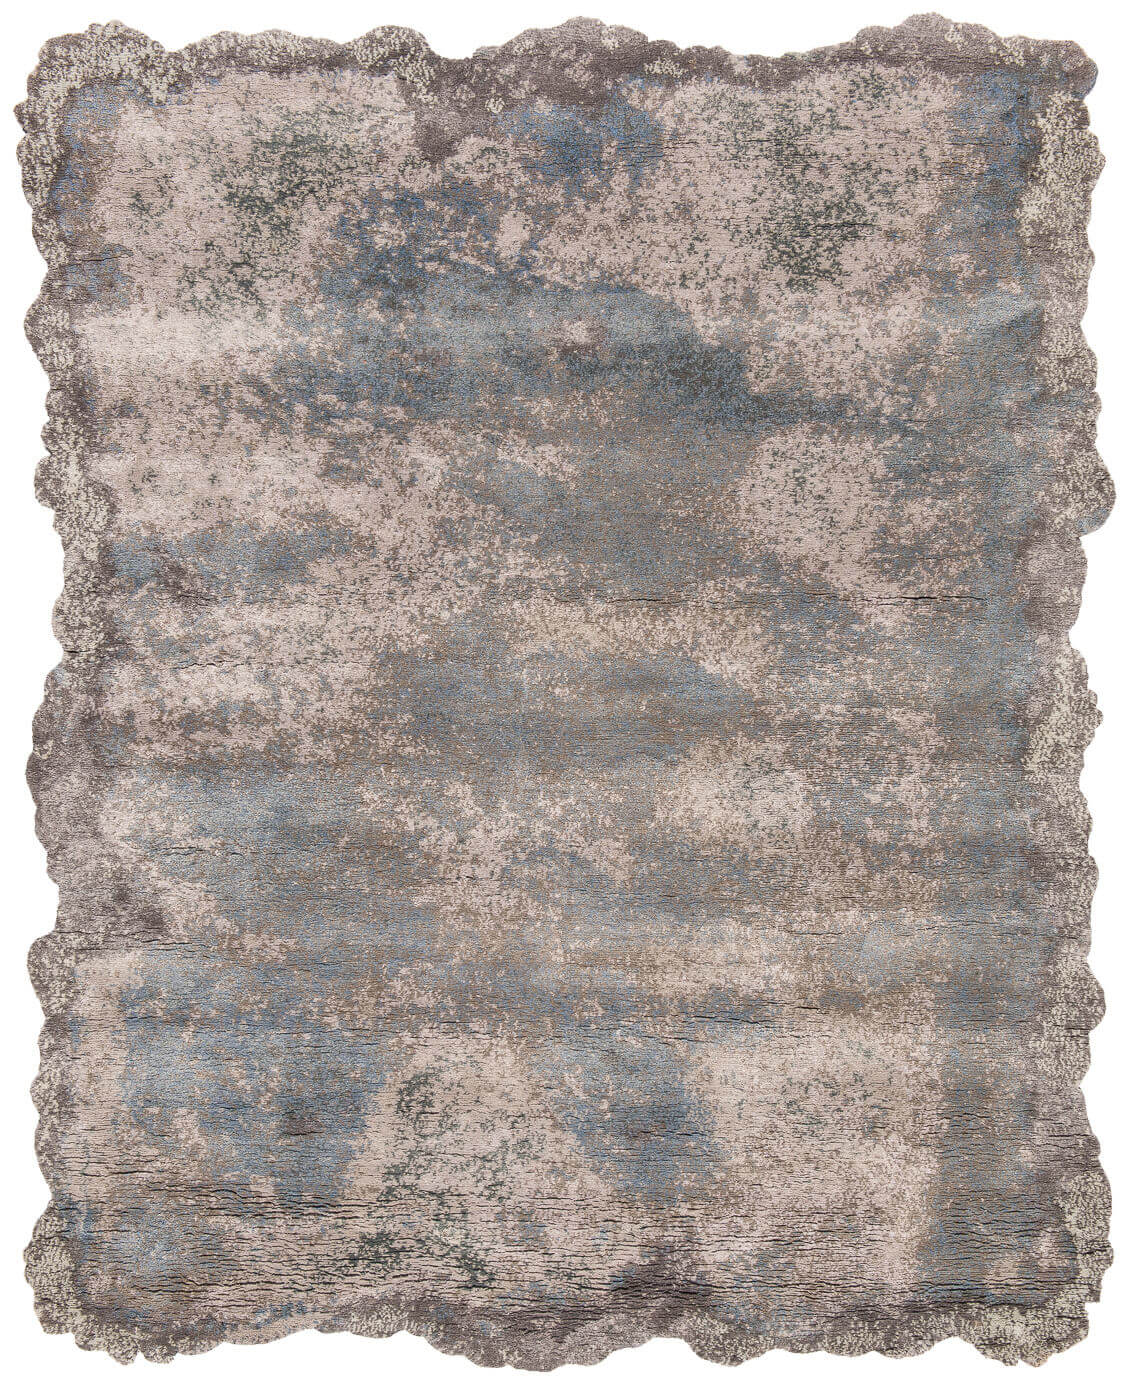 Riot Grey Hand-woven Luxury Rug ☞ Size: 250 x 300 cm